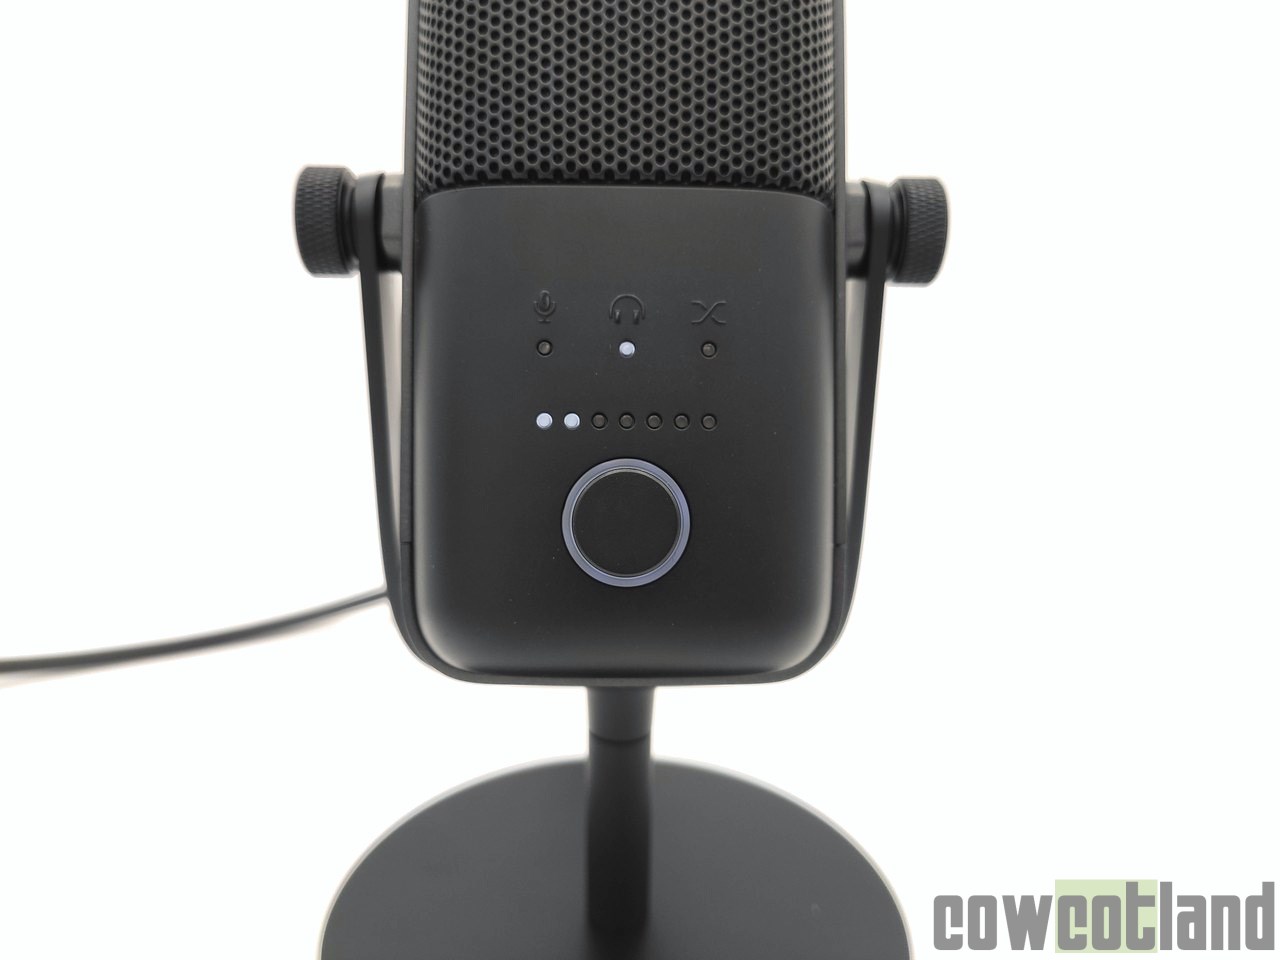 Image 44878, galerie Test Elgato Wave:3, un microphone cardiode USB taill pour le streaming